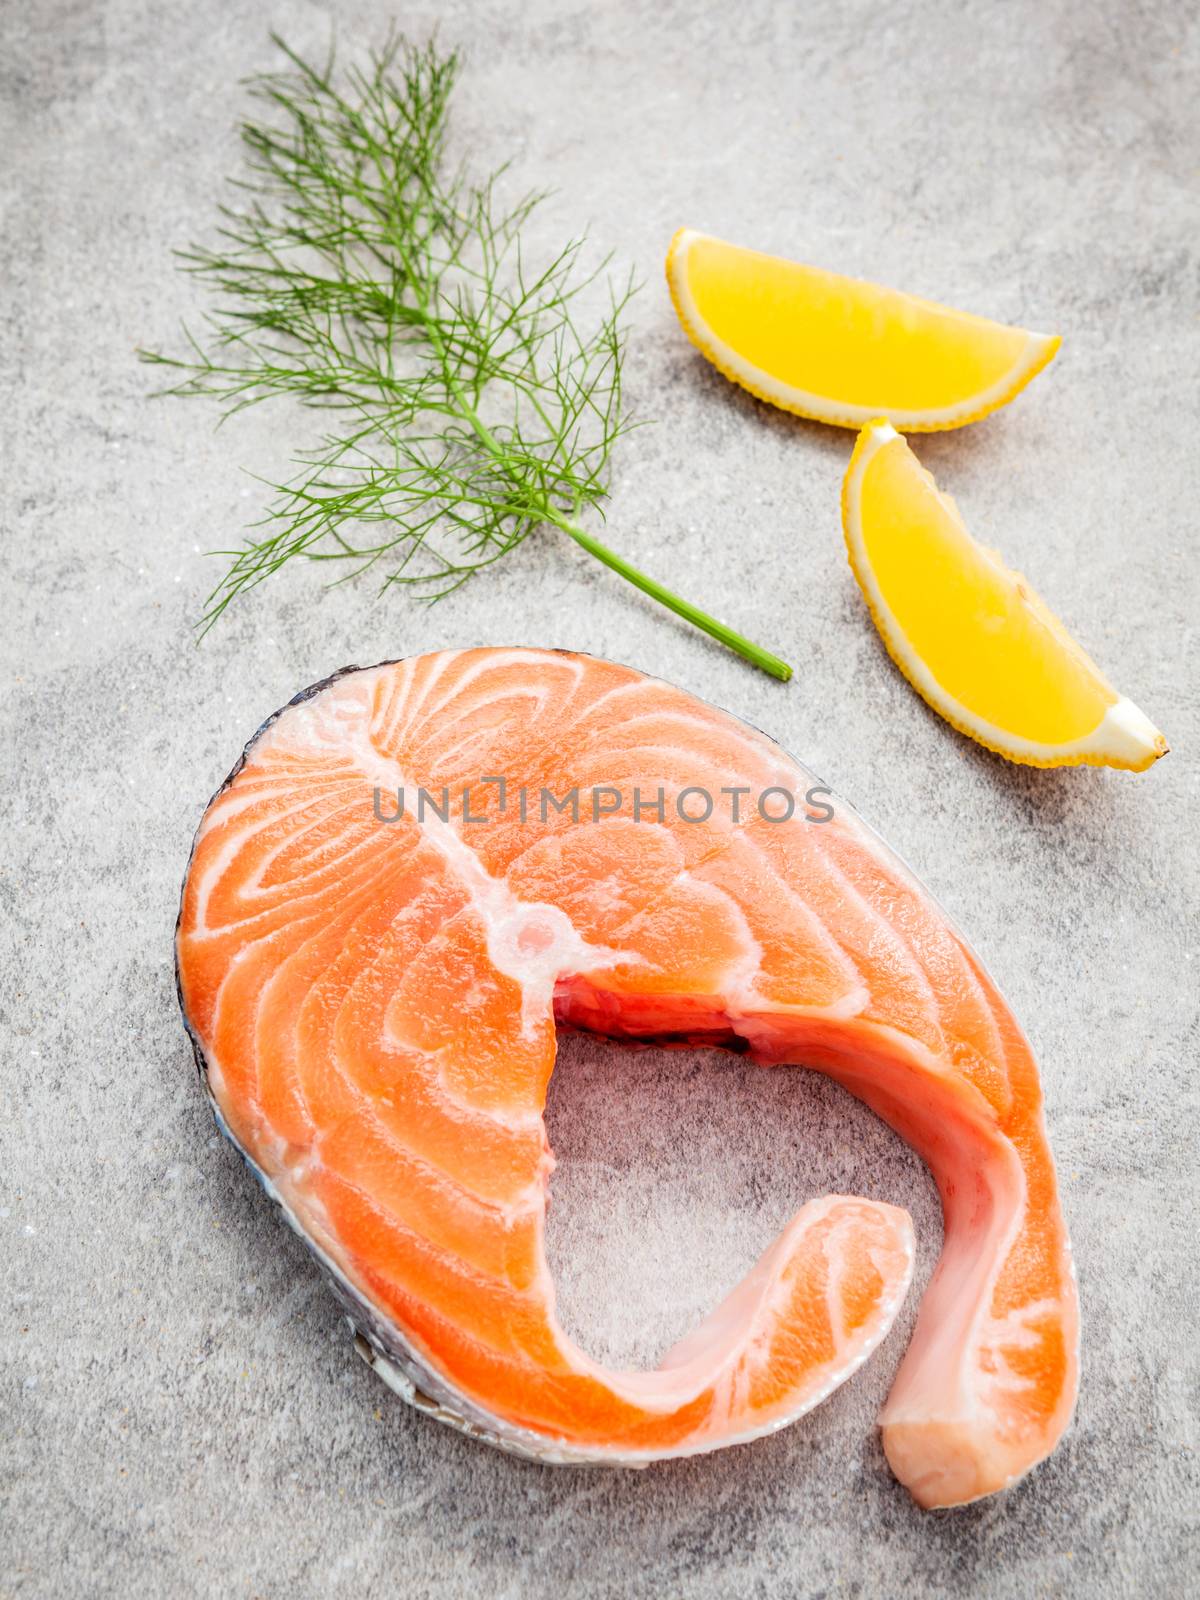 Fresh salmon fillet slice on dark stone background with  fennel and lemon propose  for cooking . Healthy food concept.